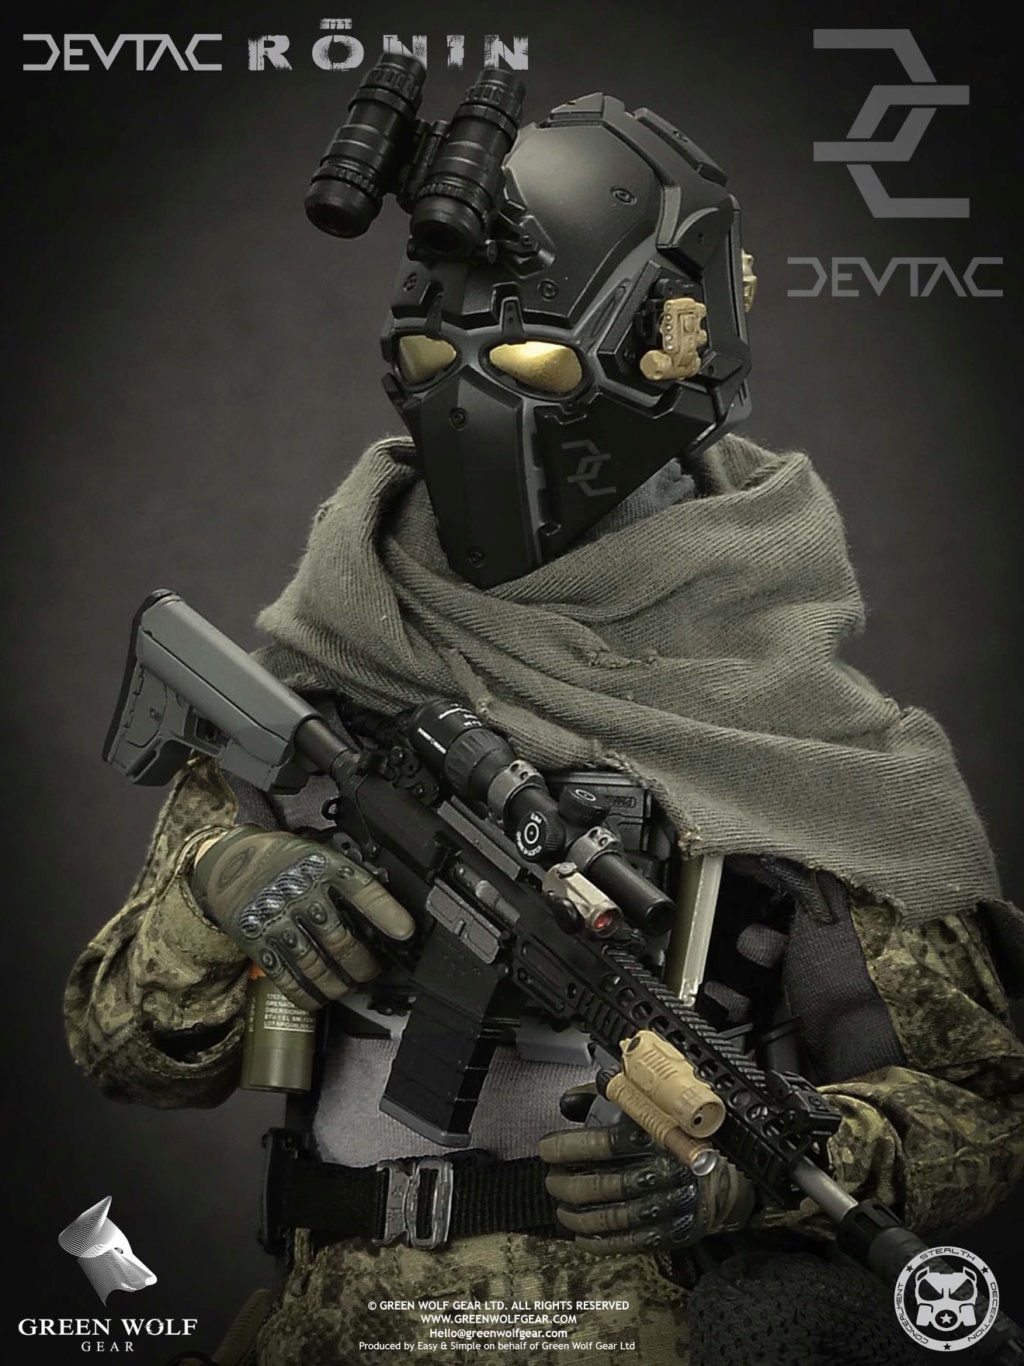 modernmilitary - NEW PRODUCT: Green Wolf Gear DEVTAC Ronin 1/6 Action Figure (VS2434P) 1532